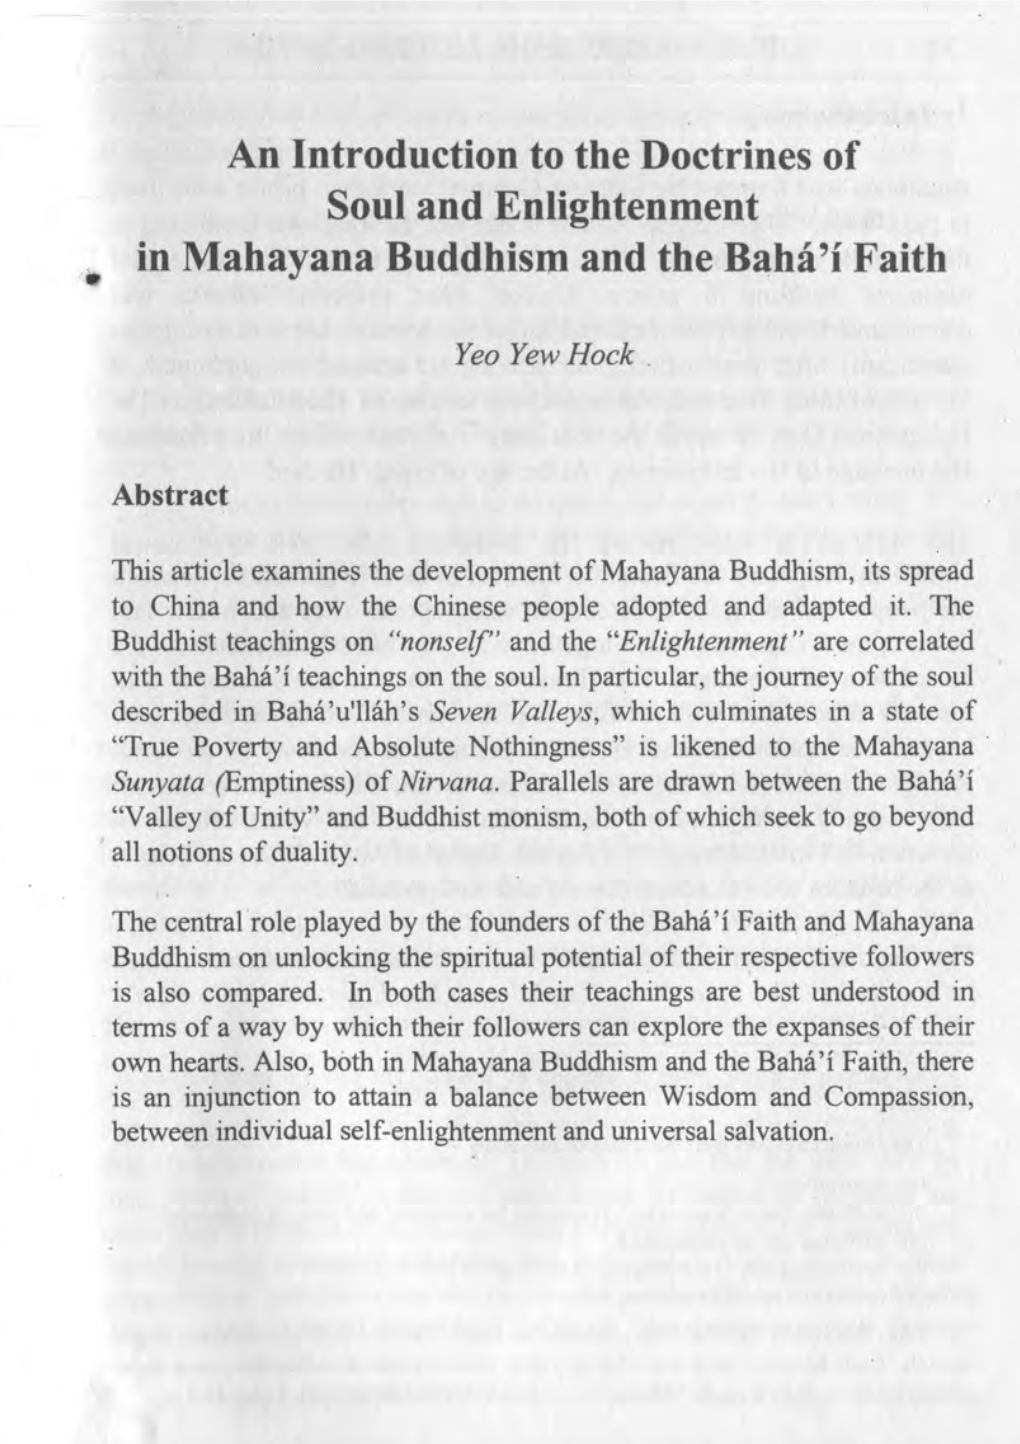 An Introduction to the Doctrines of Soul and Enlightenment in Mahayana Buddhism and the Baha'i Faith